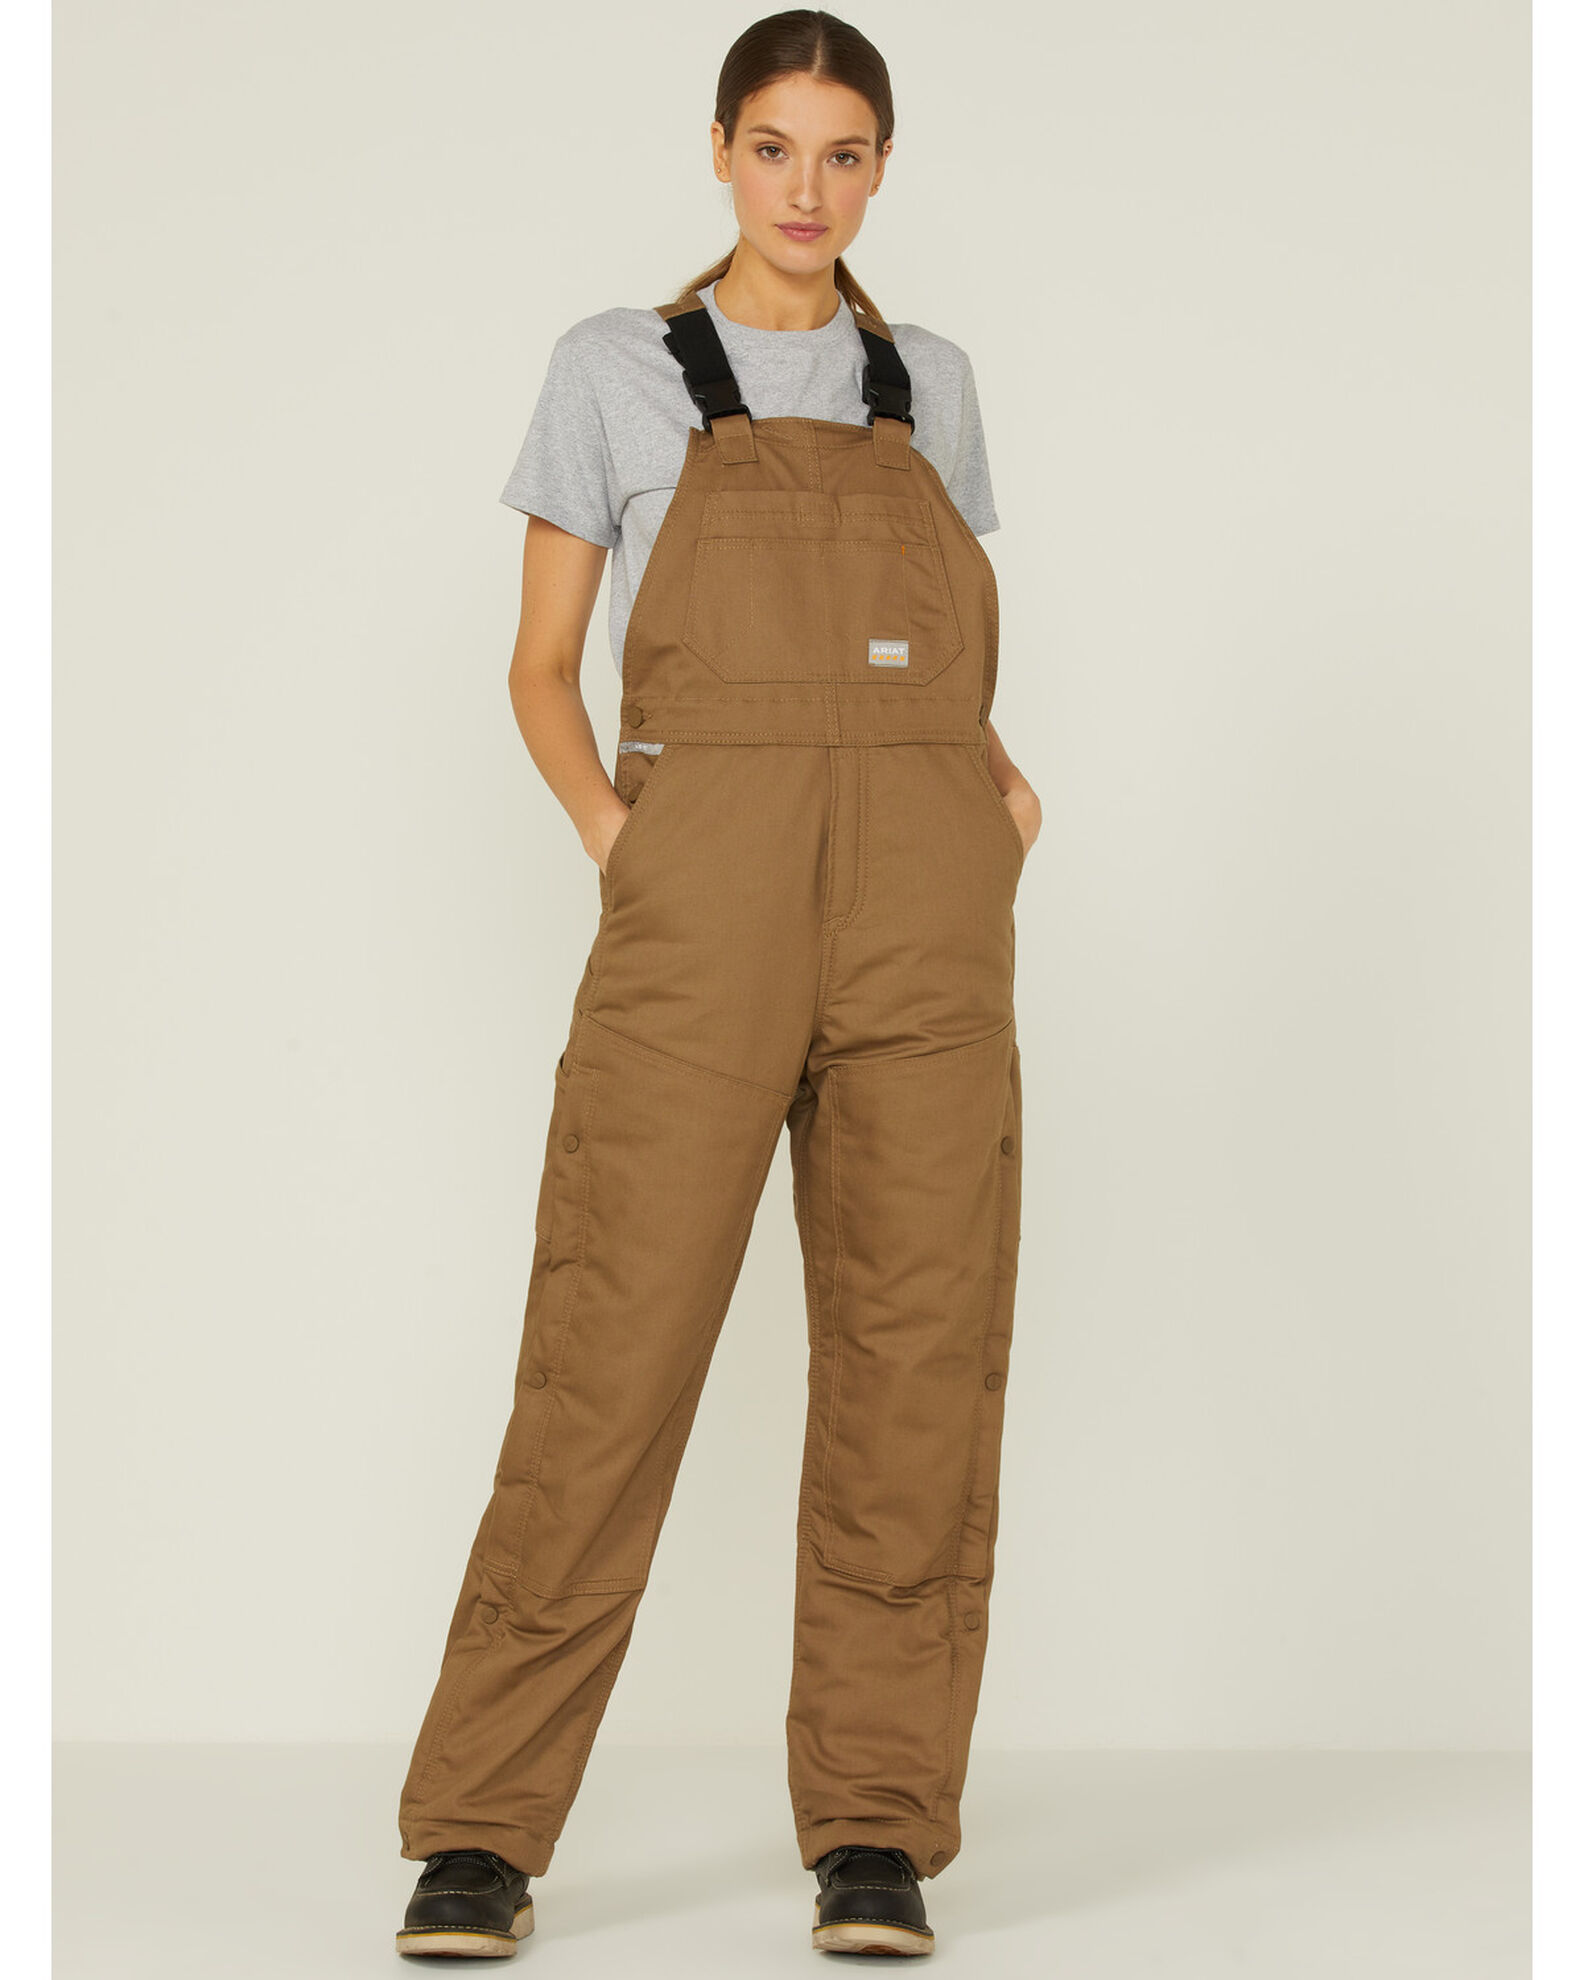 Why Are Hipsters Wearing Carhartt?  Overalls men fashion, Overalls  fashion, Carhartt overalls